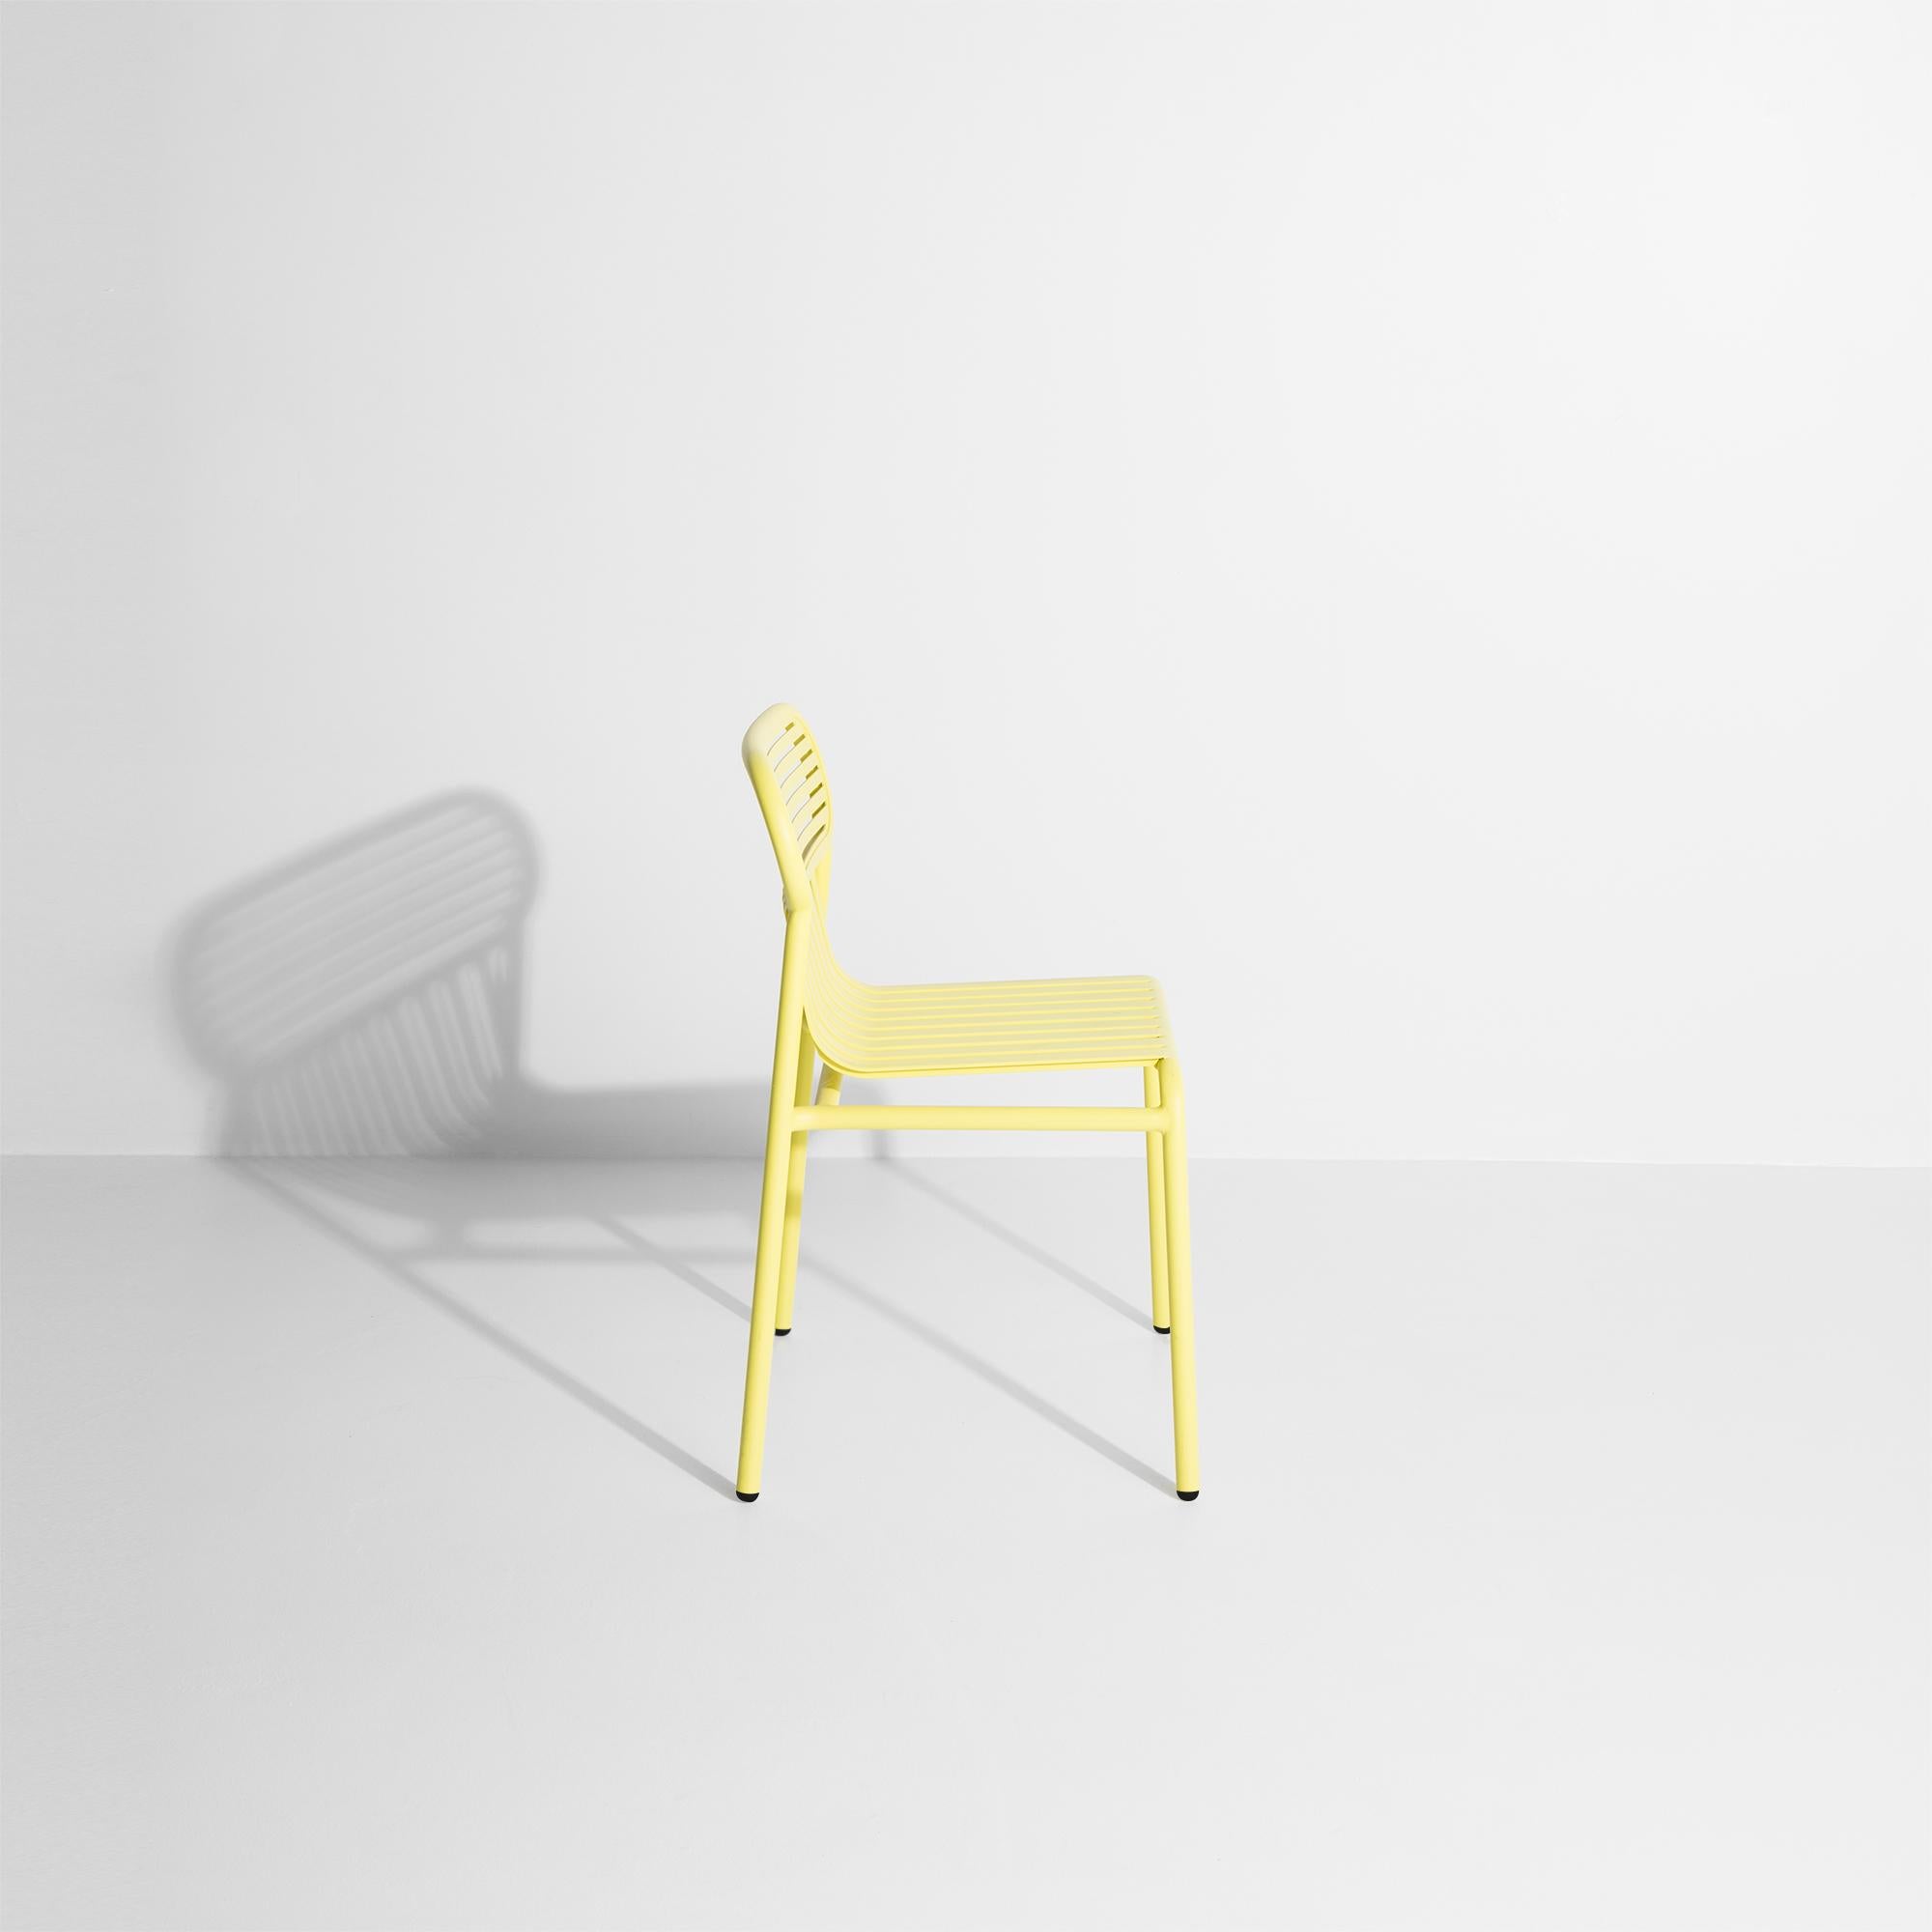 Petite Friture Week-End Chair in Yellow Aluminium by Studio BrichetZiegler In New Condition For Sale In Brooklyn, NY